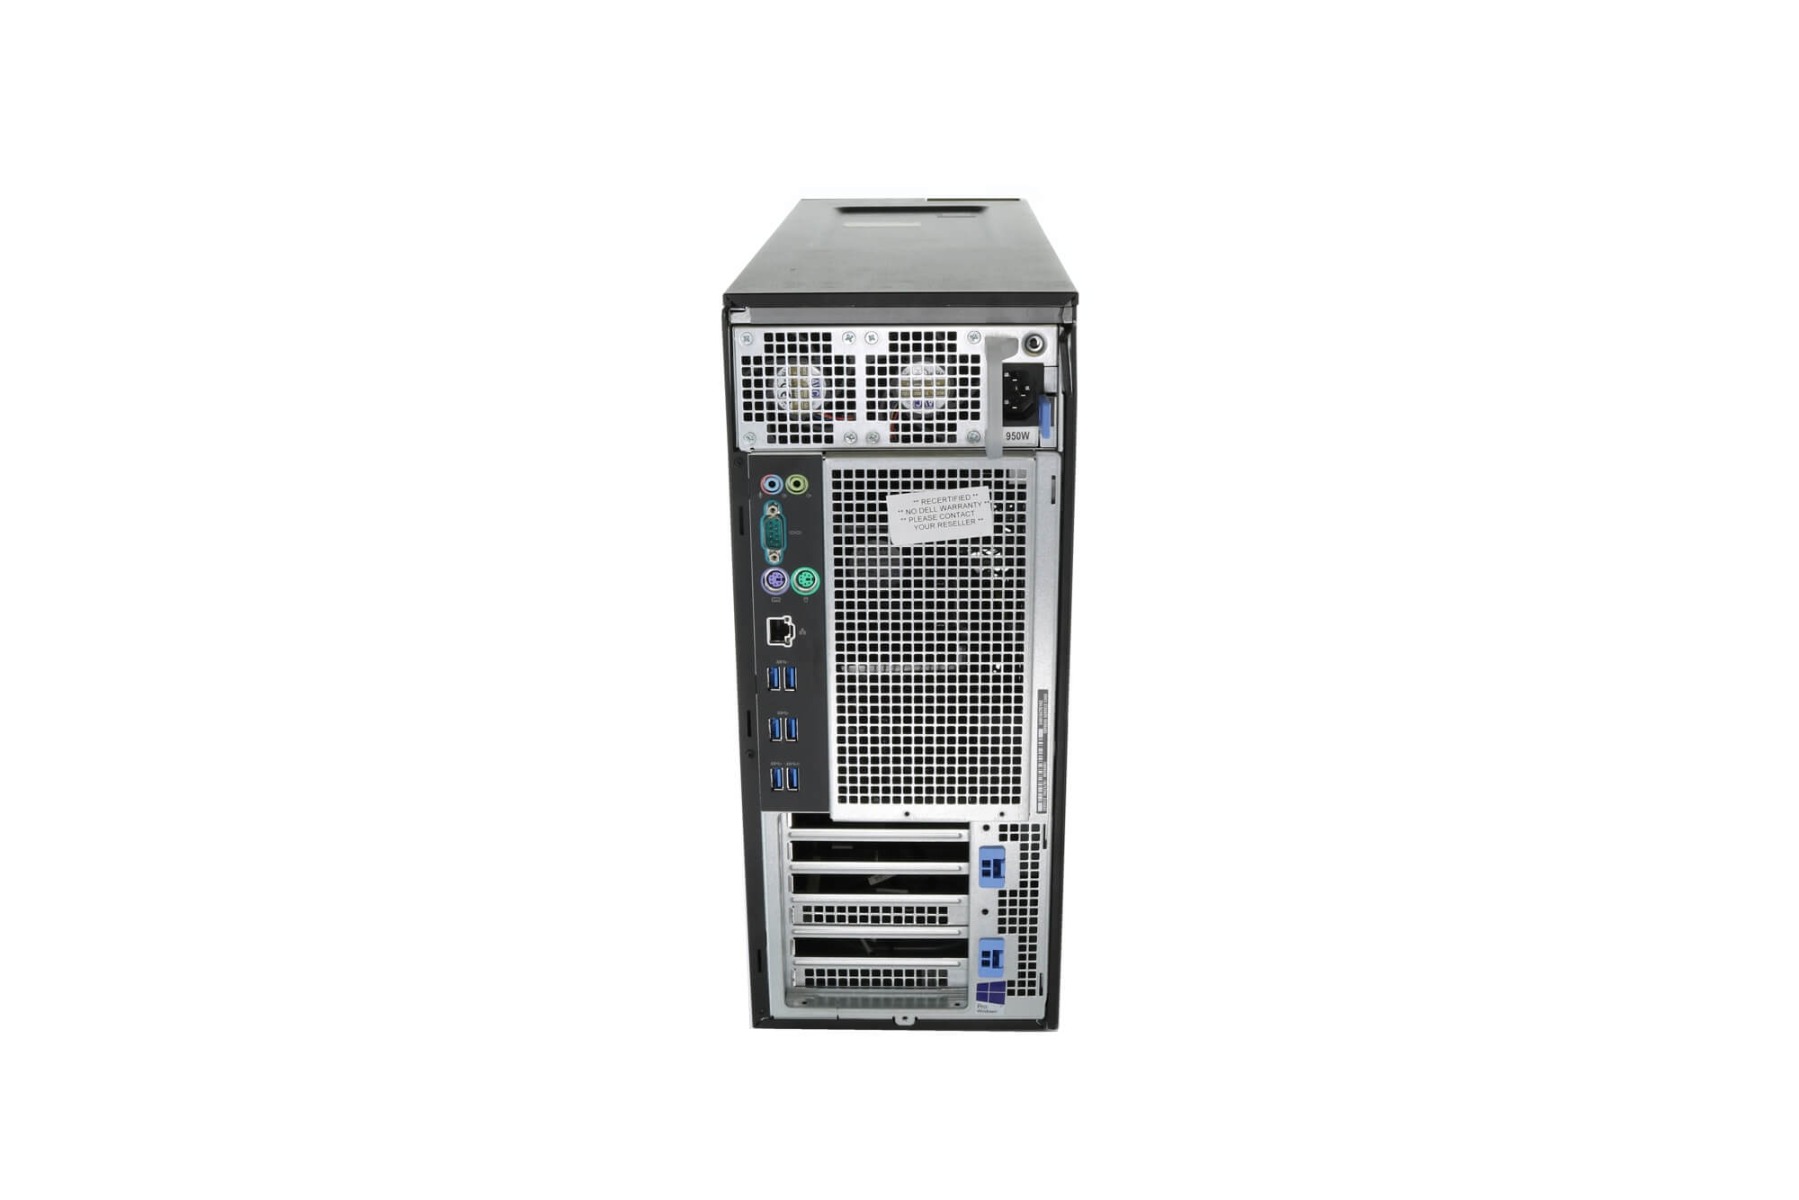 Dell Precision T5820 Tower Workstation - Configure Your Own